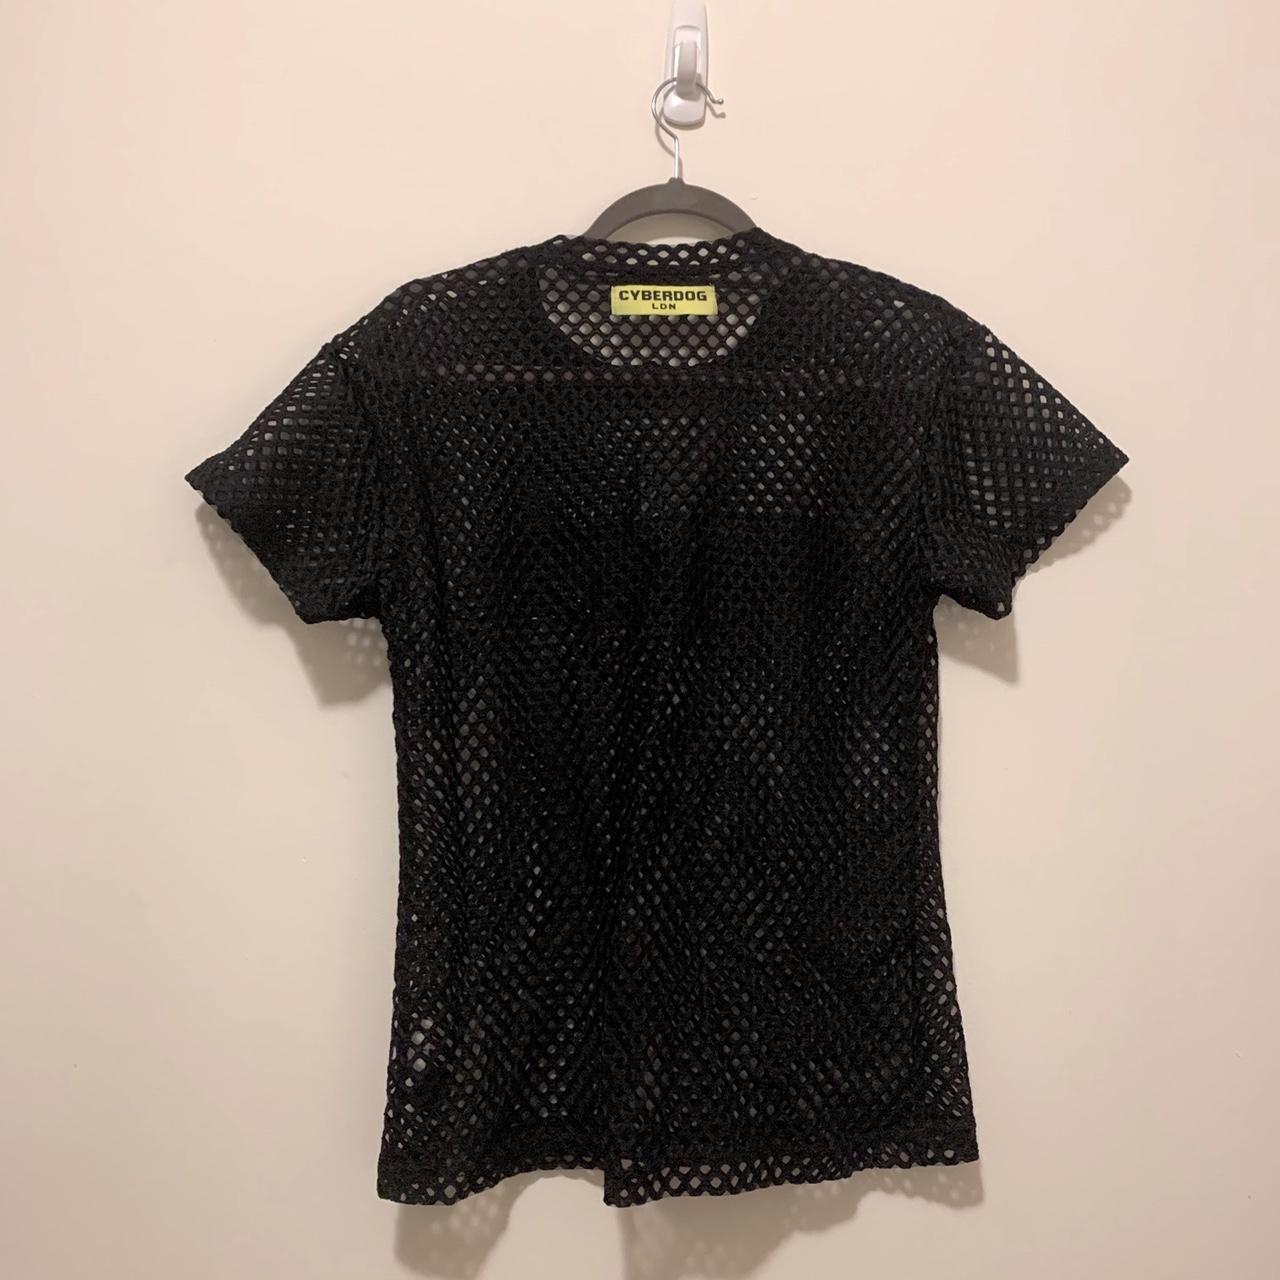 Rare gothic black mesh top from Cyberdog // size M... - Depop